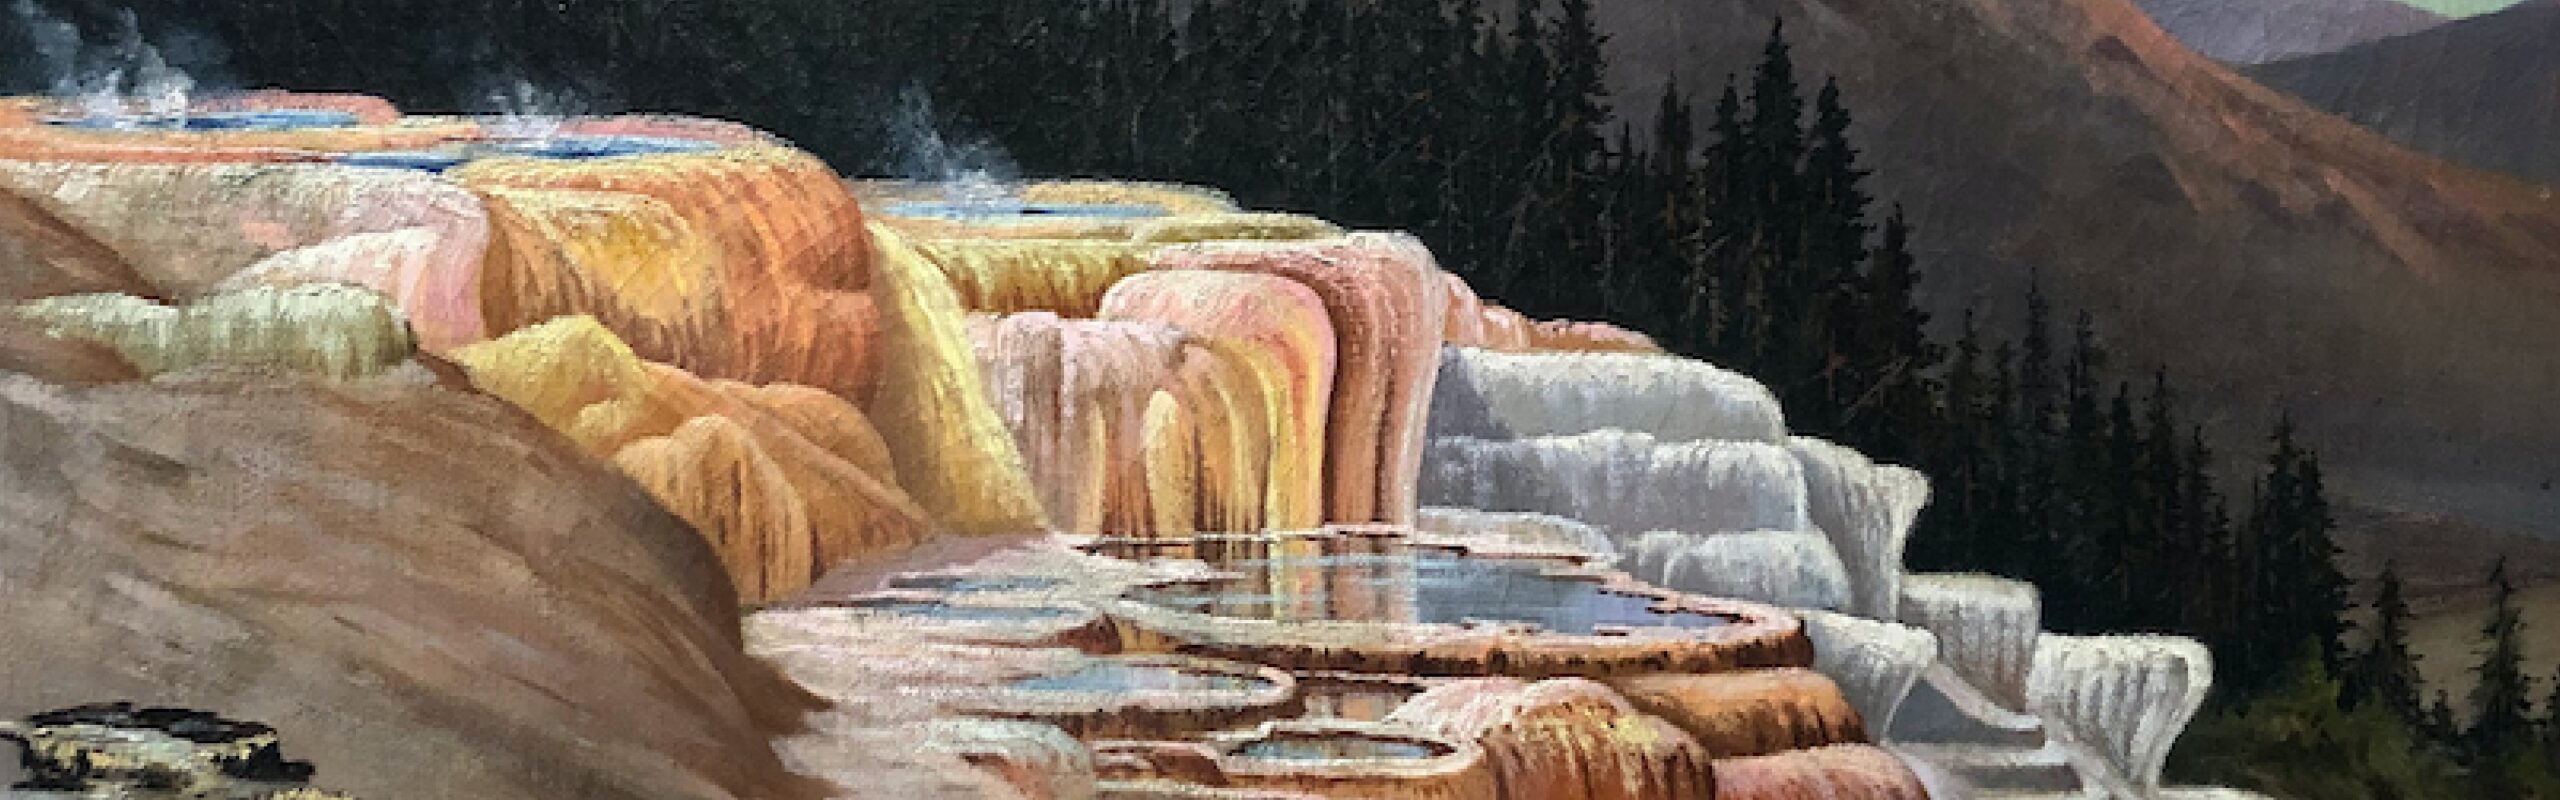 Grafton Tyler Brown, Hot Springs at Yellowstone, 1889, oil on canvas, 16 x 24 inches. Purchased with funds from the Terra Art Enrichment Fund, 2020.16.